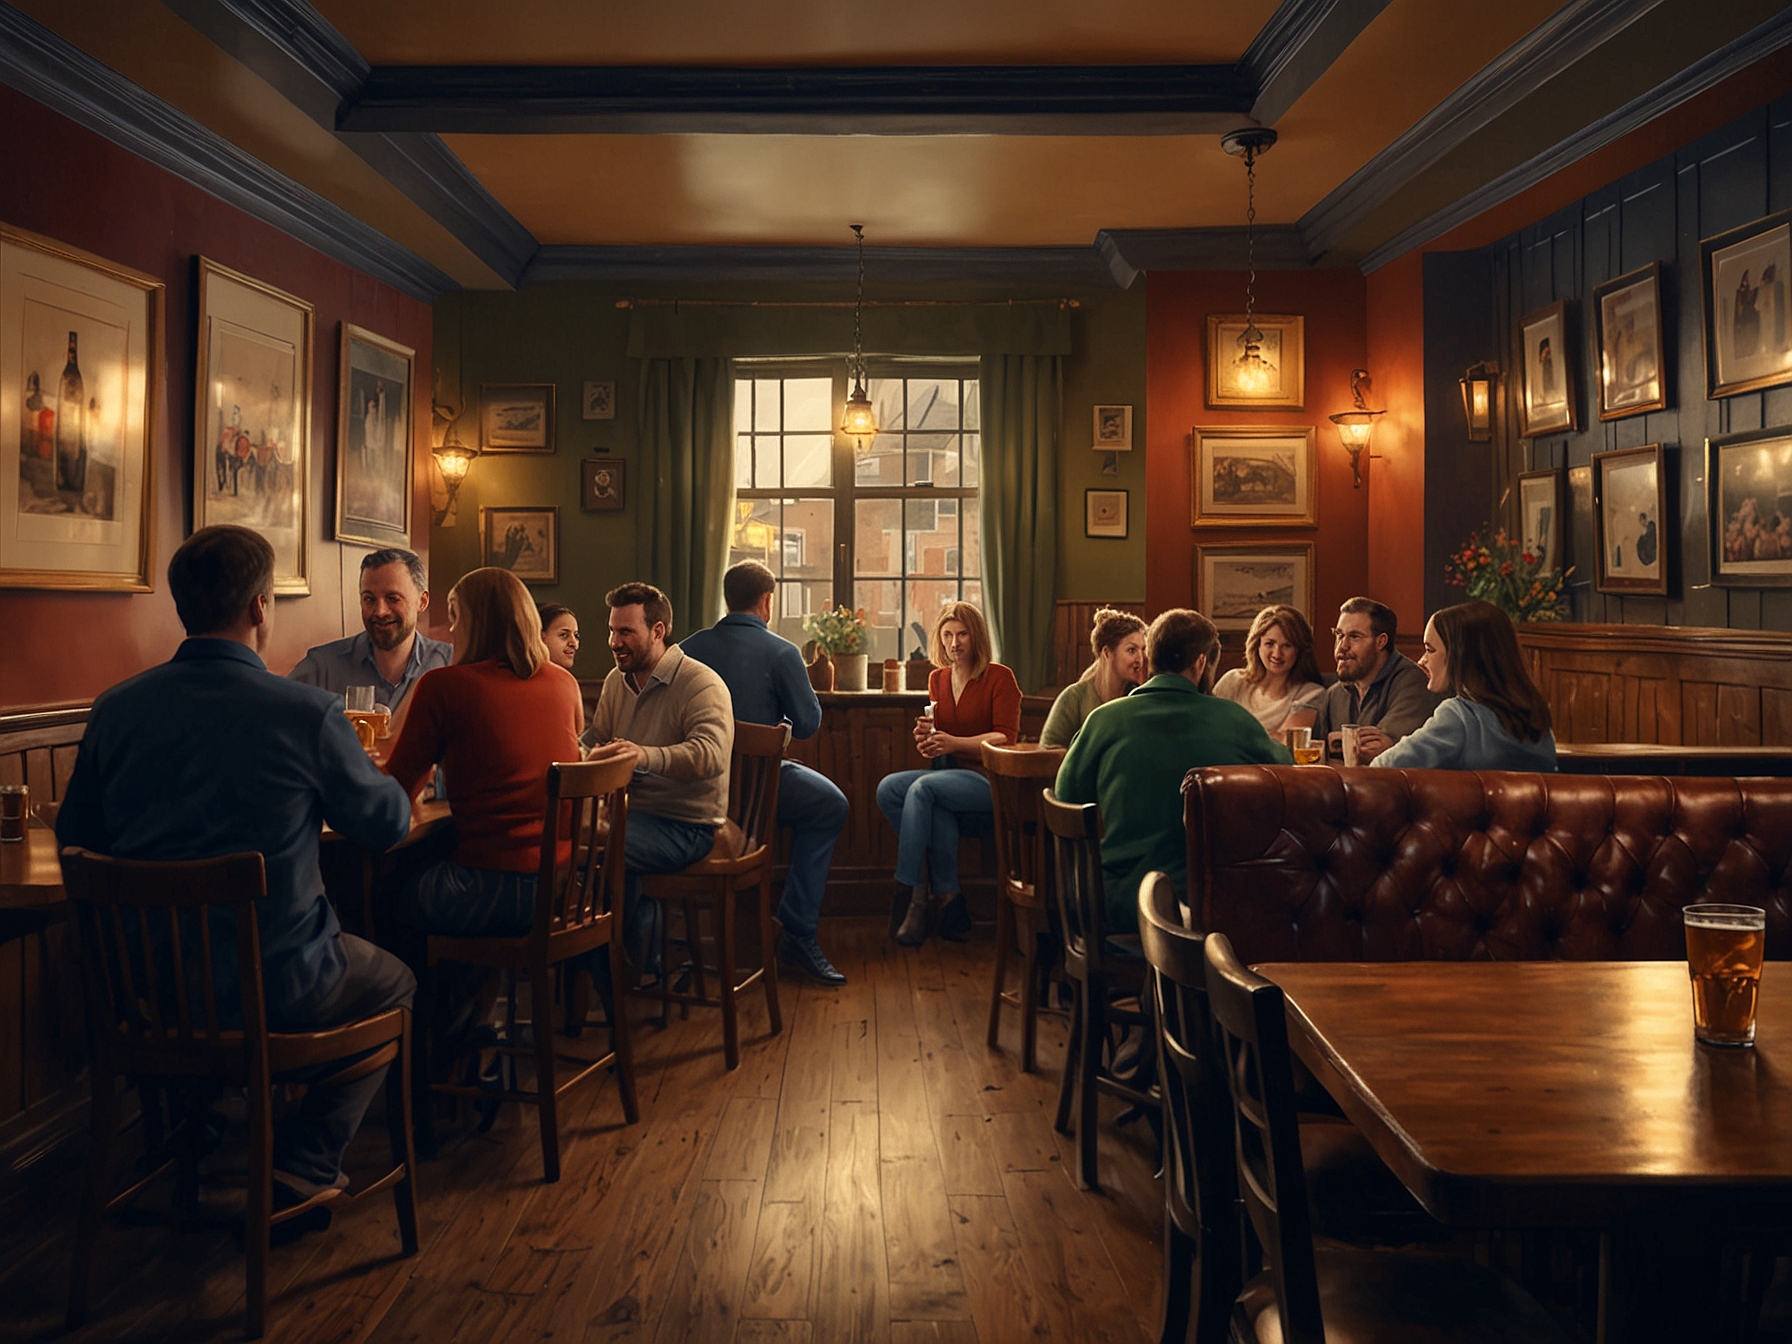 A vibrant community scene inside a traditional British pub, filled with patrons engaging in lively conversation, highlighting what is at risk as more pubs shut down.